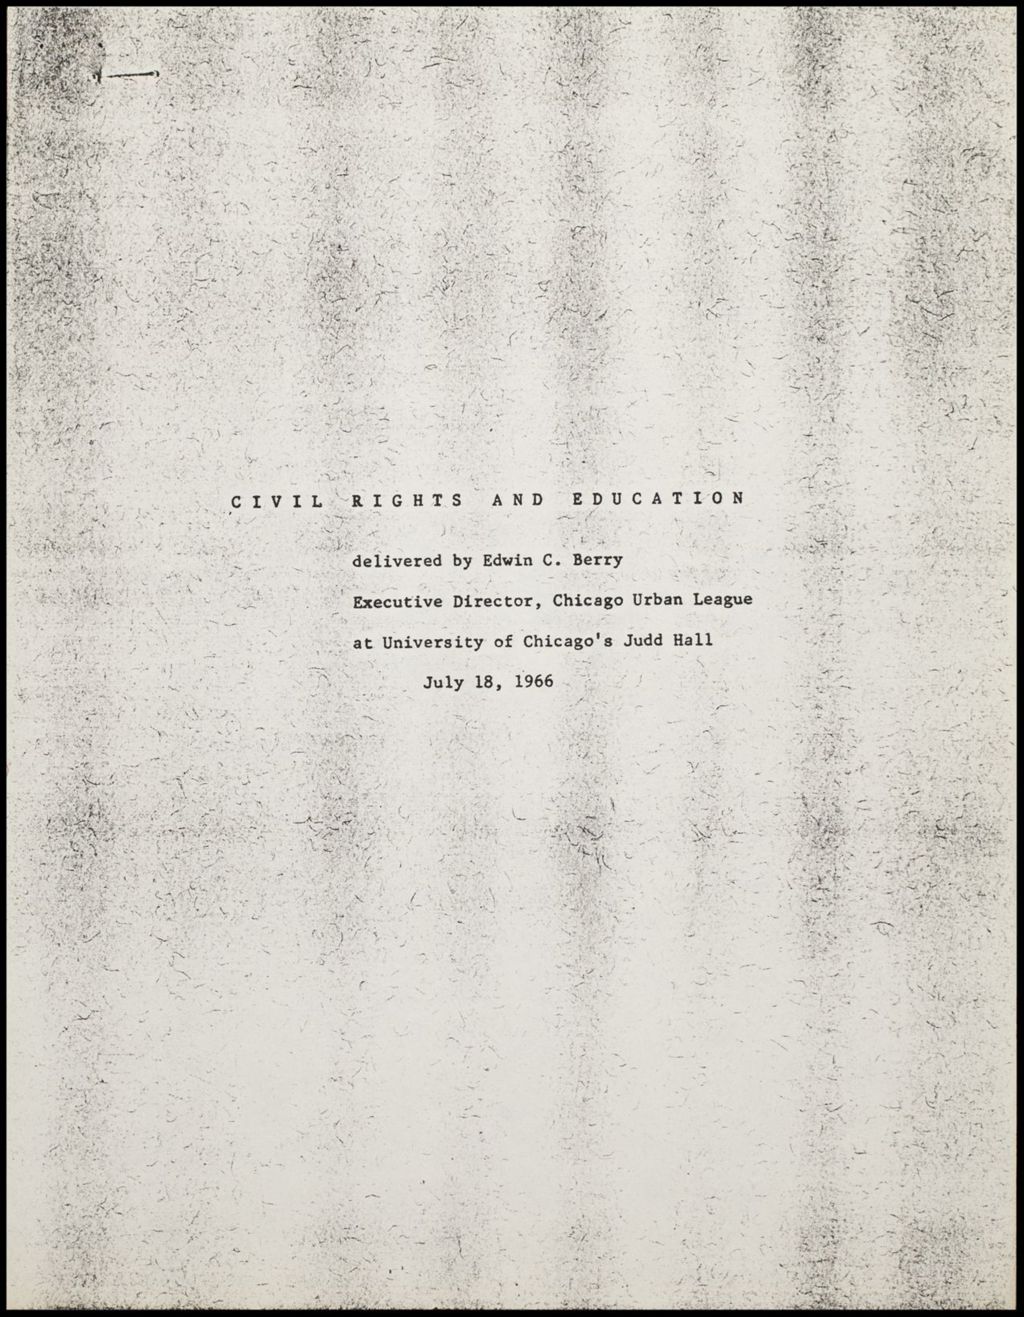 Civil Rights and Education, 1966 (Folder III-2935)